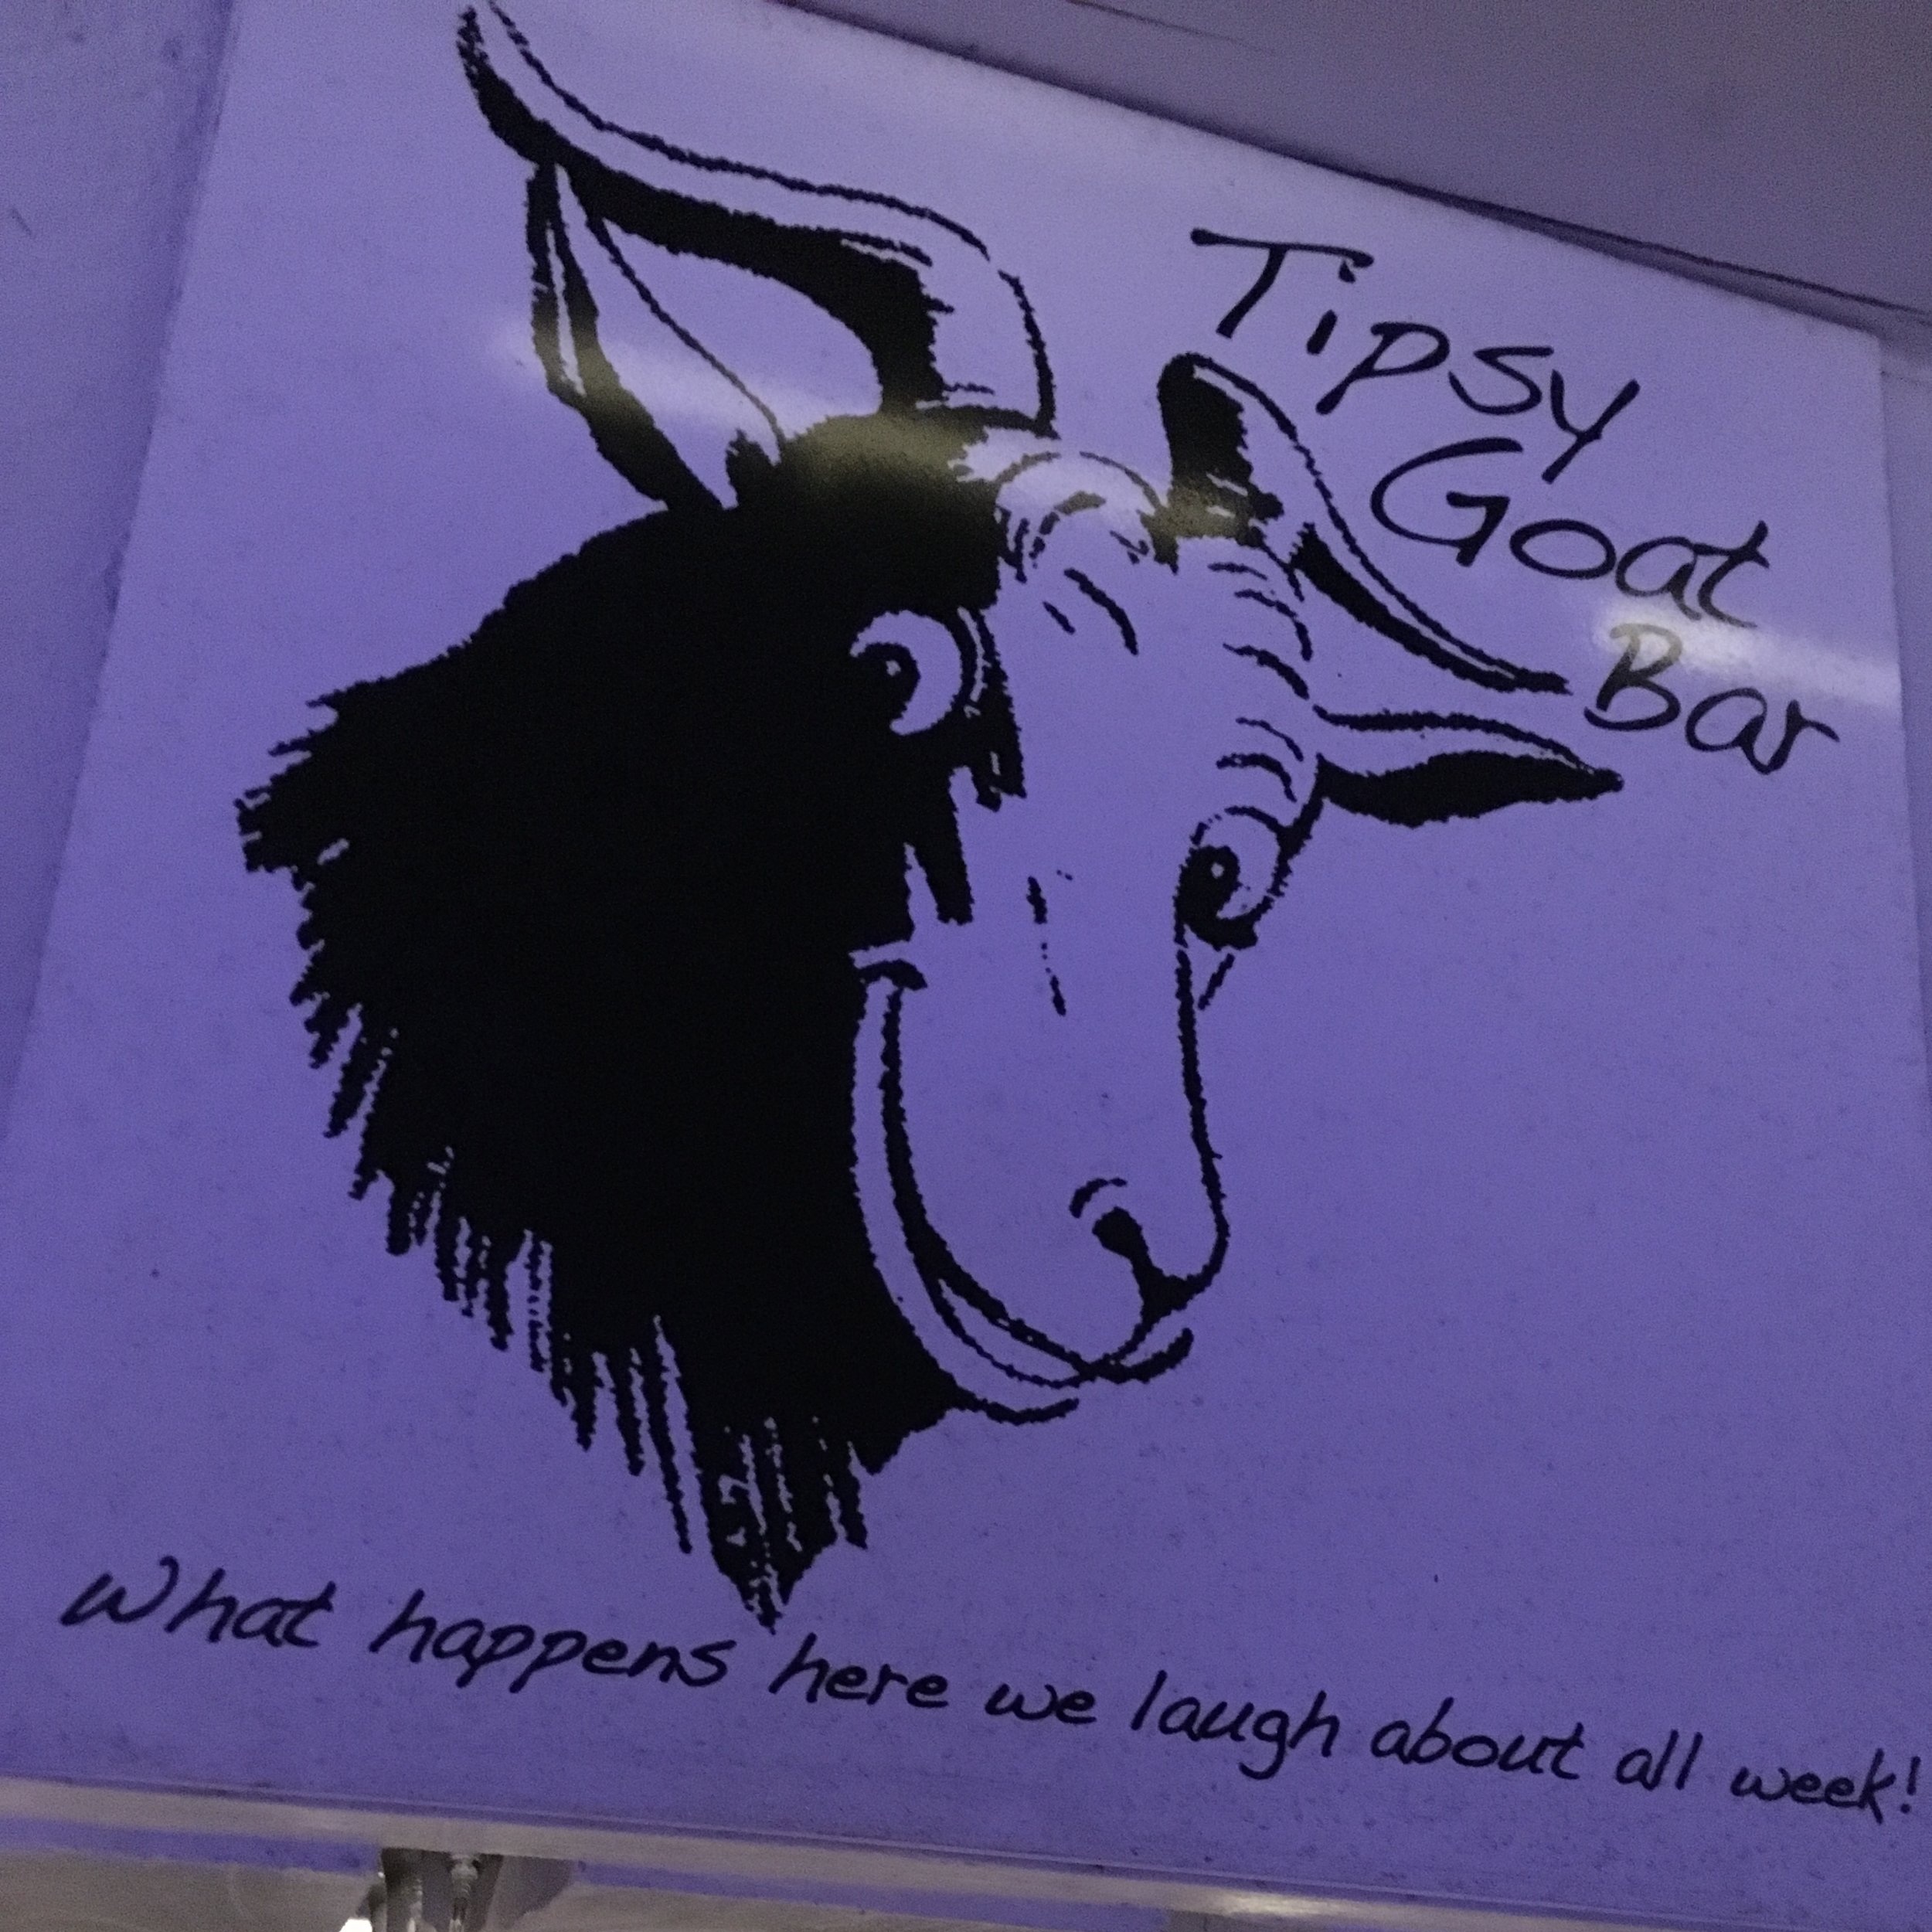 Tipsy Goat bar at Juliana's... this place is a hoot! The slogan is cut off: "What happens here, we laugh about all week."